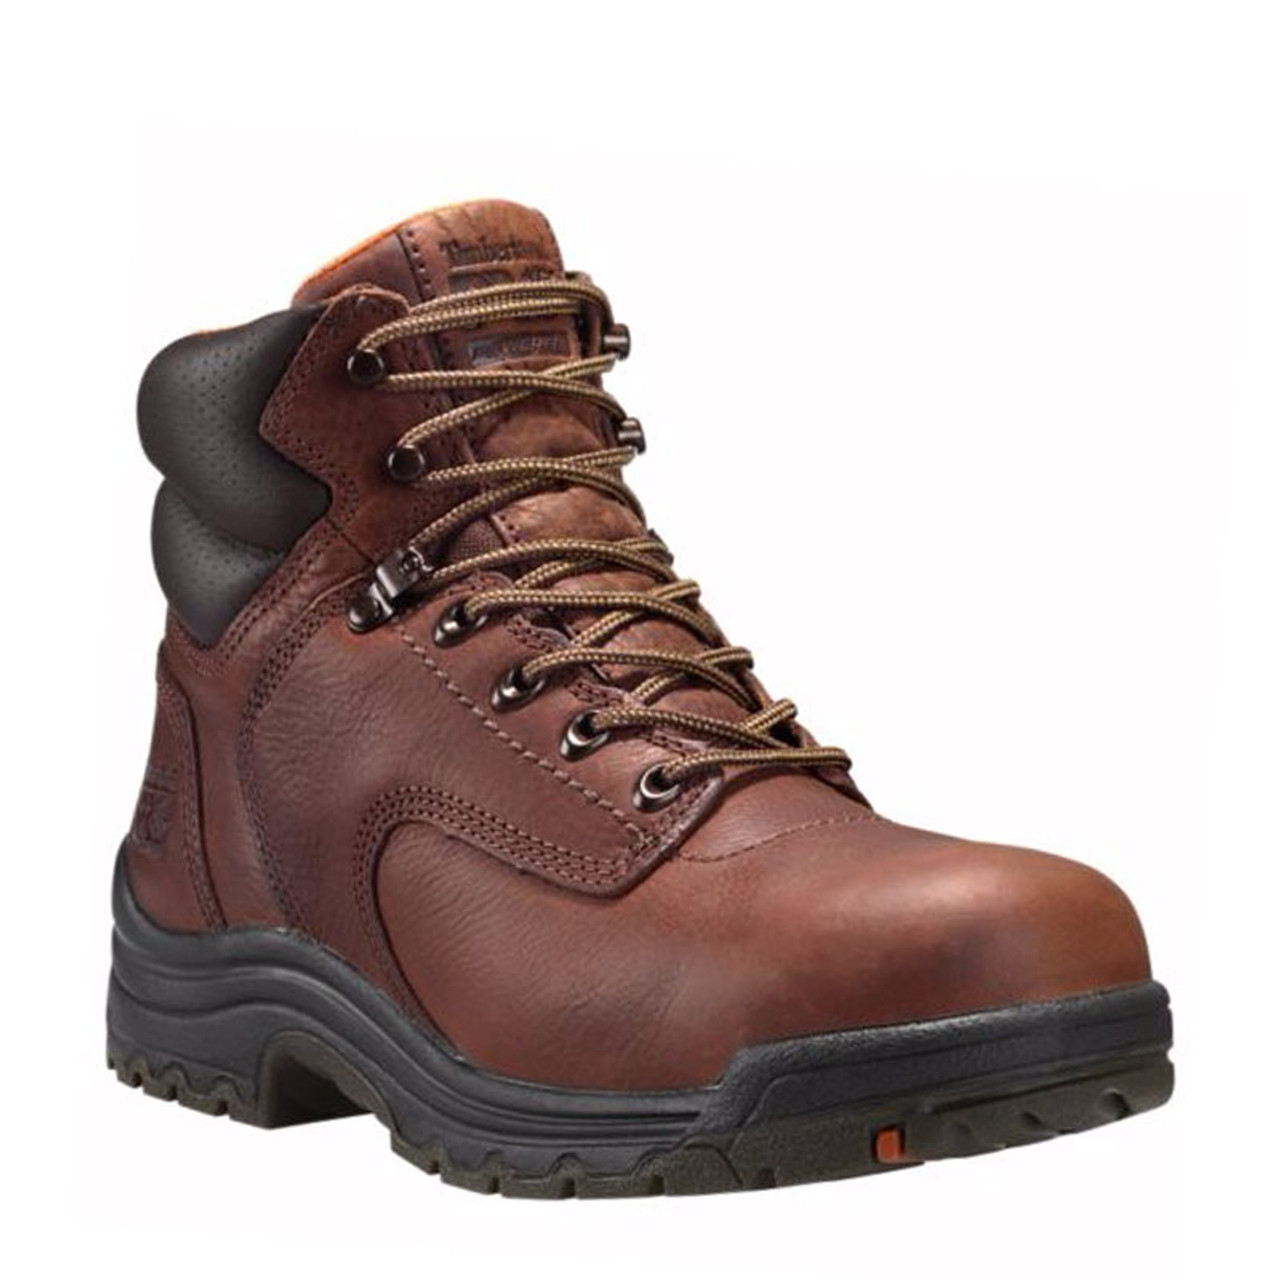 Timberland PRO 26388 Women's TITAN Safety Toe Work Boots - Family ...